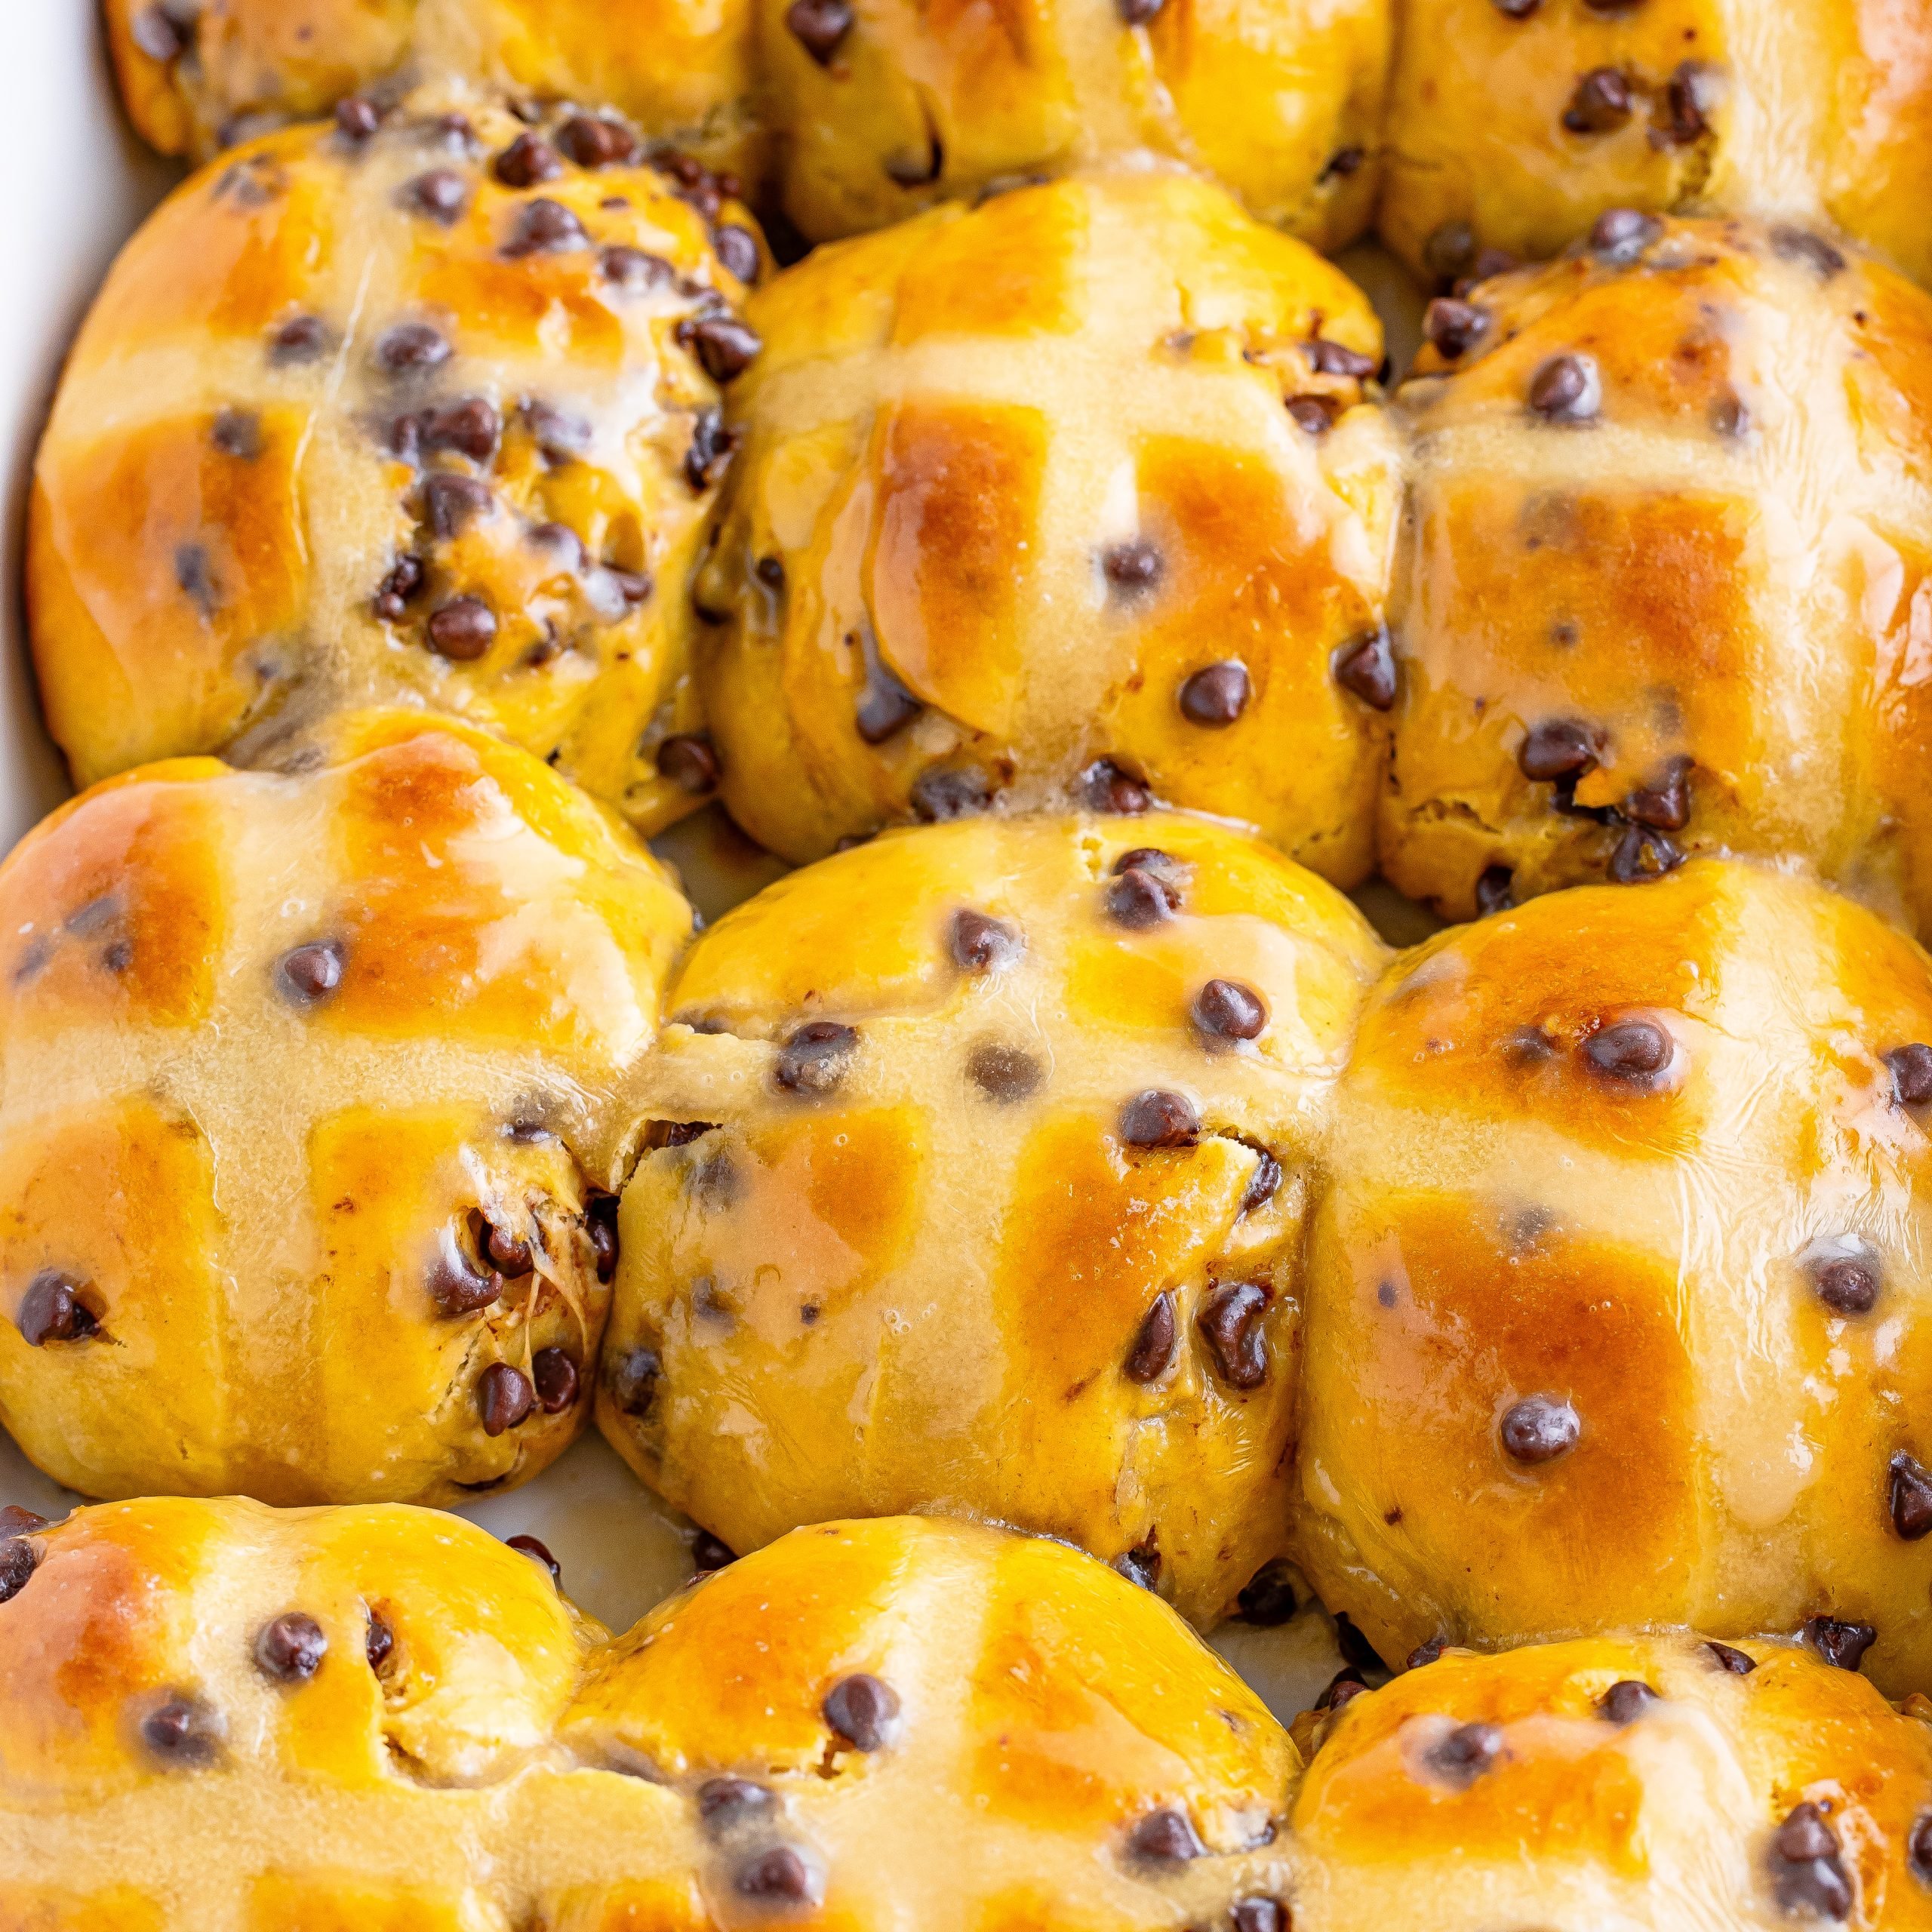 Hot Cross Buns (with chocolate chips)